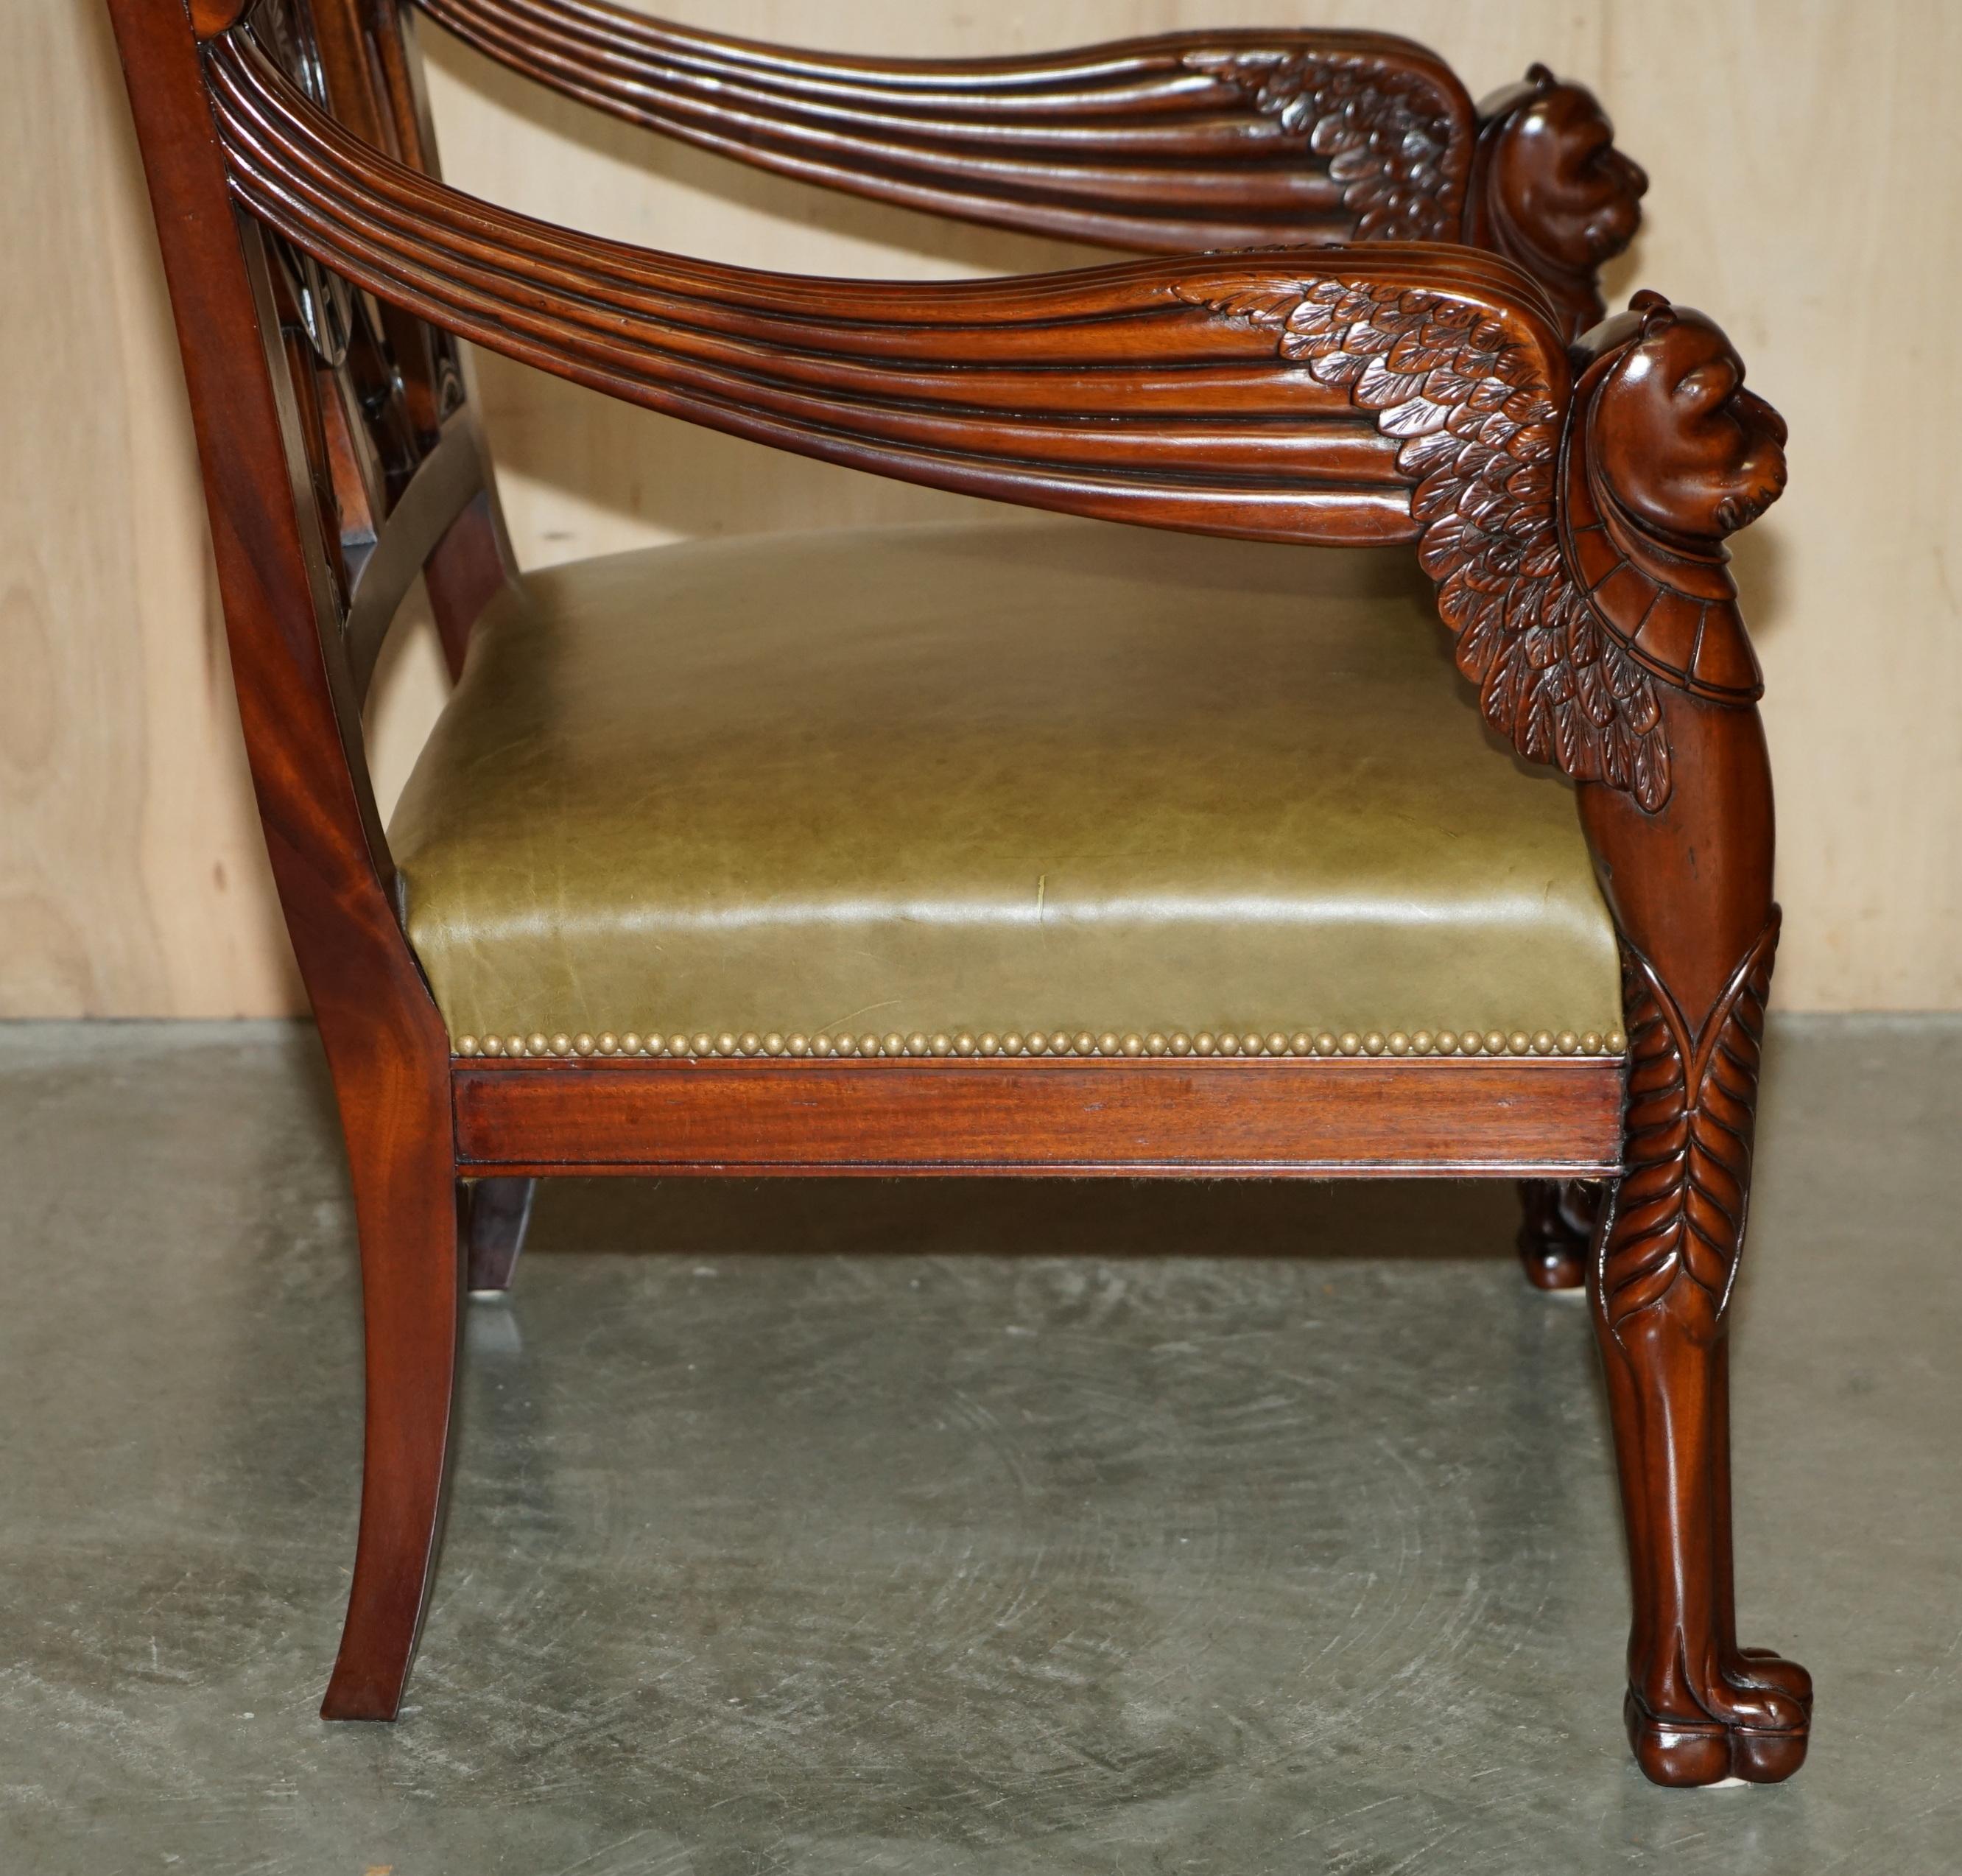 EXQUISITE PAIR OF HAND CARved HARDWOOD LiBRARY ARMCHAIRS LION GRIFFON WING ARMS im Angebot 9